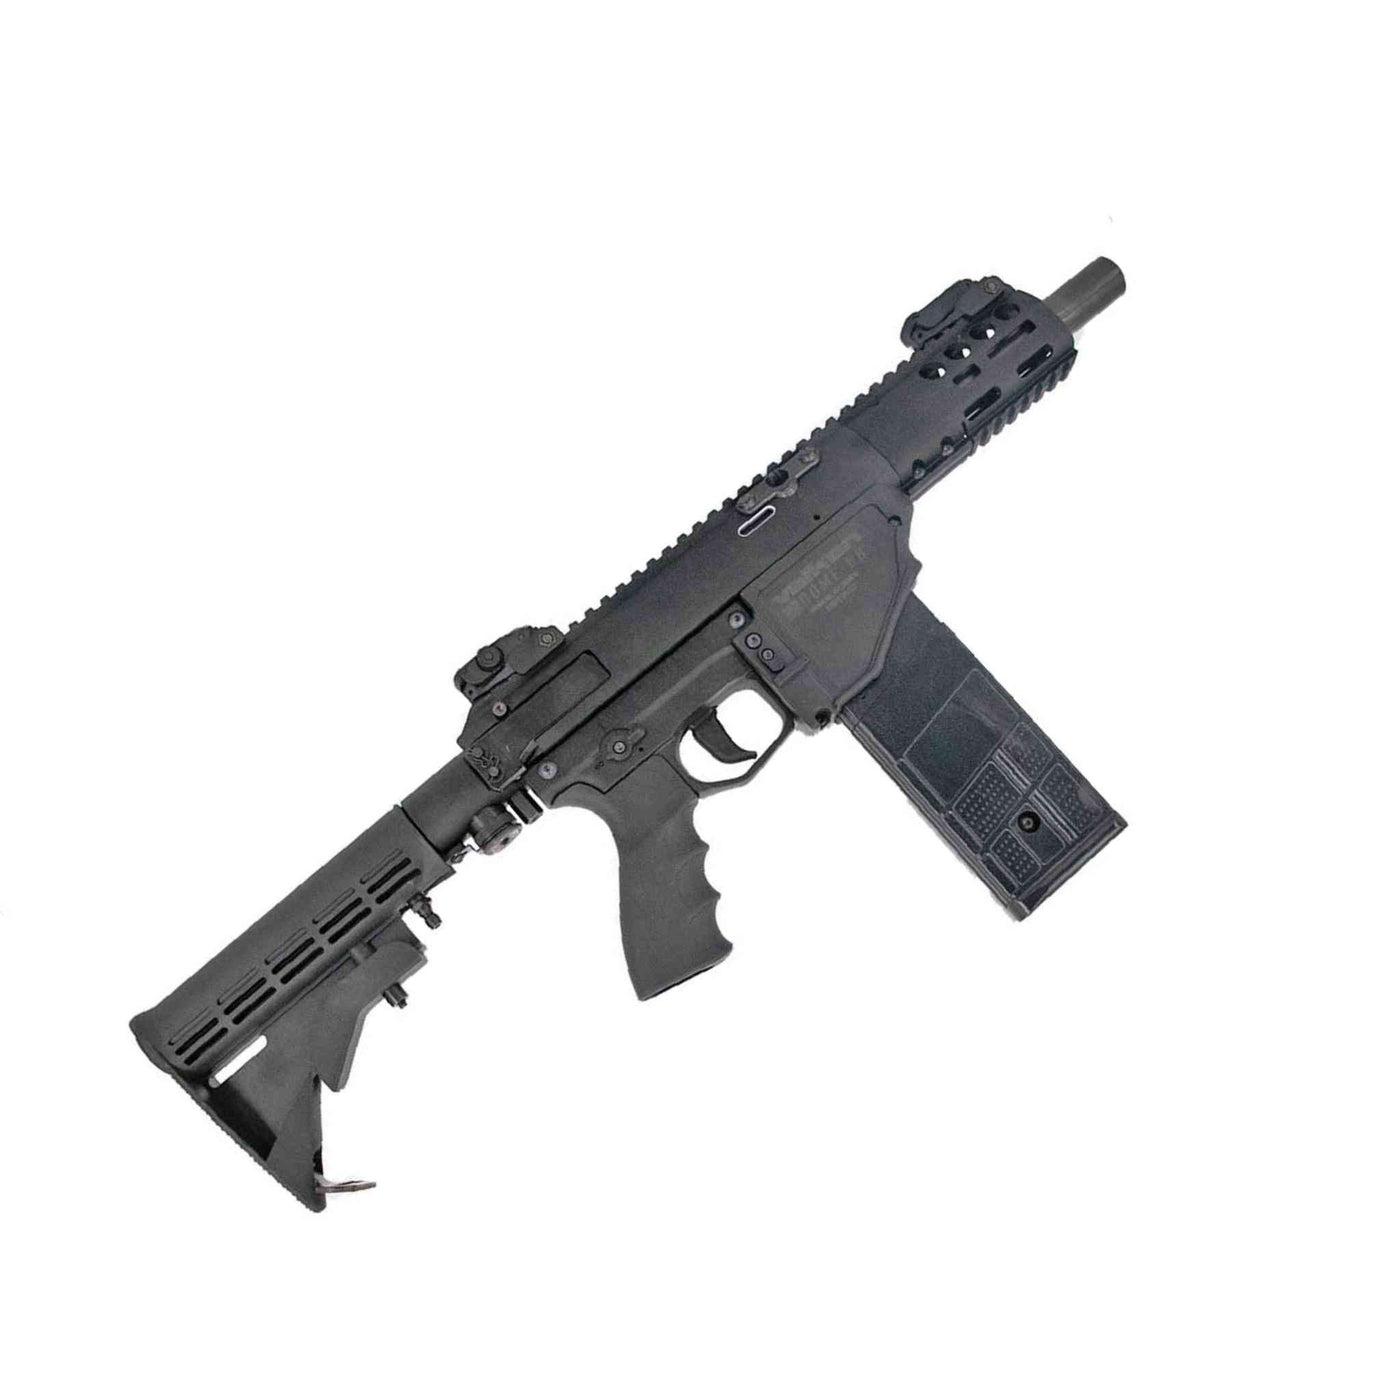 The Valken CQMF or Close Quarter Mag Fed Gun is an easy to use Paintball Gun that operated with a High Pressure Air System.